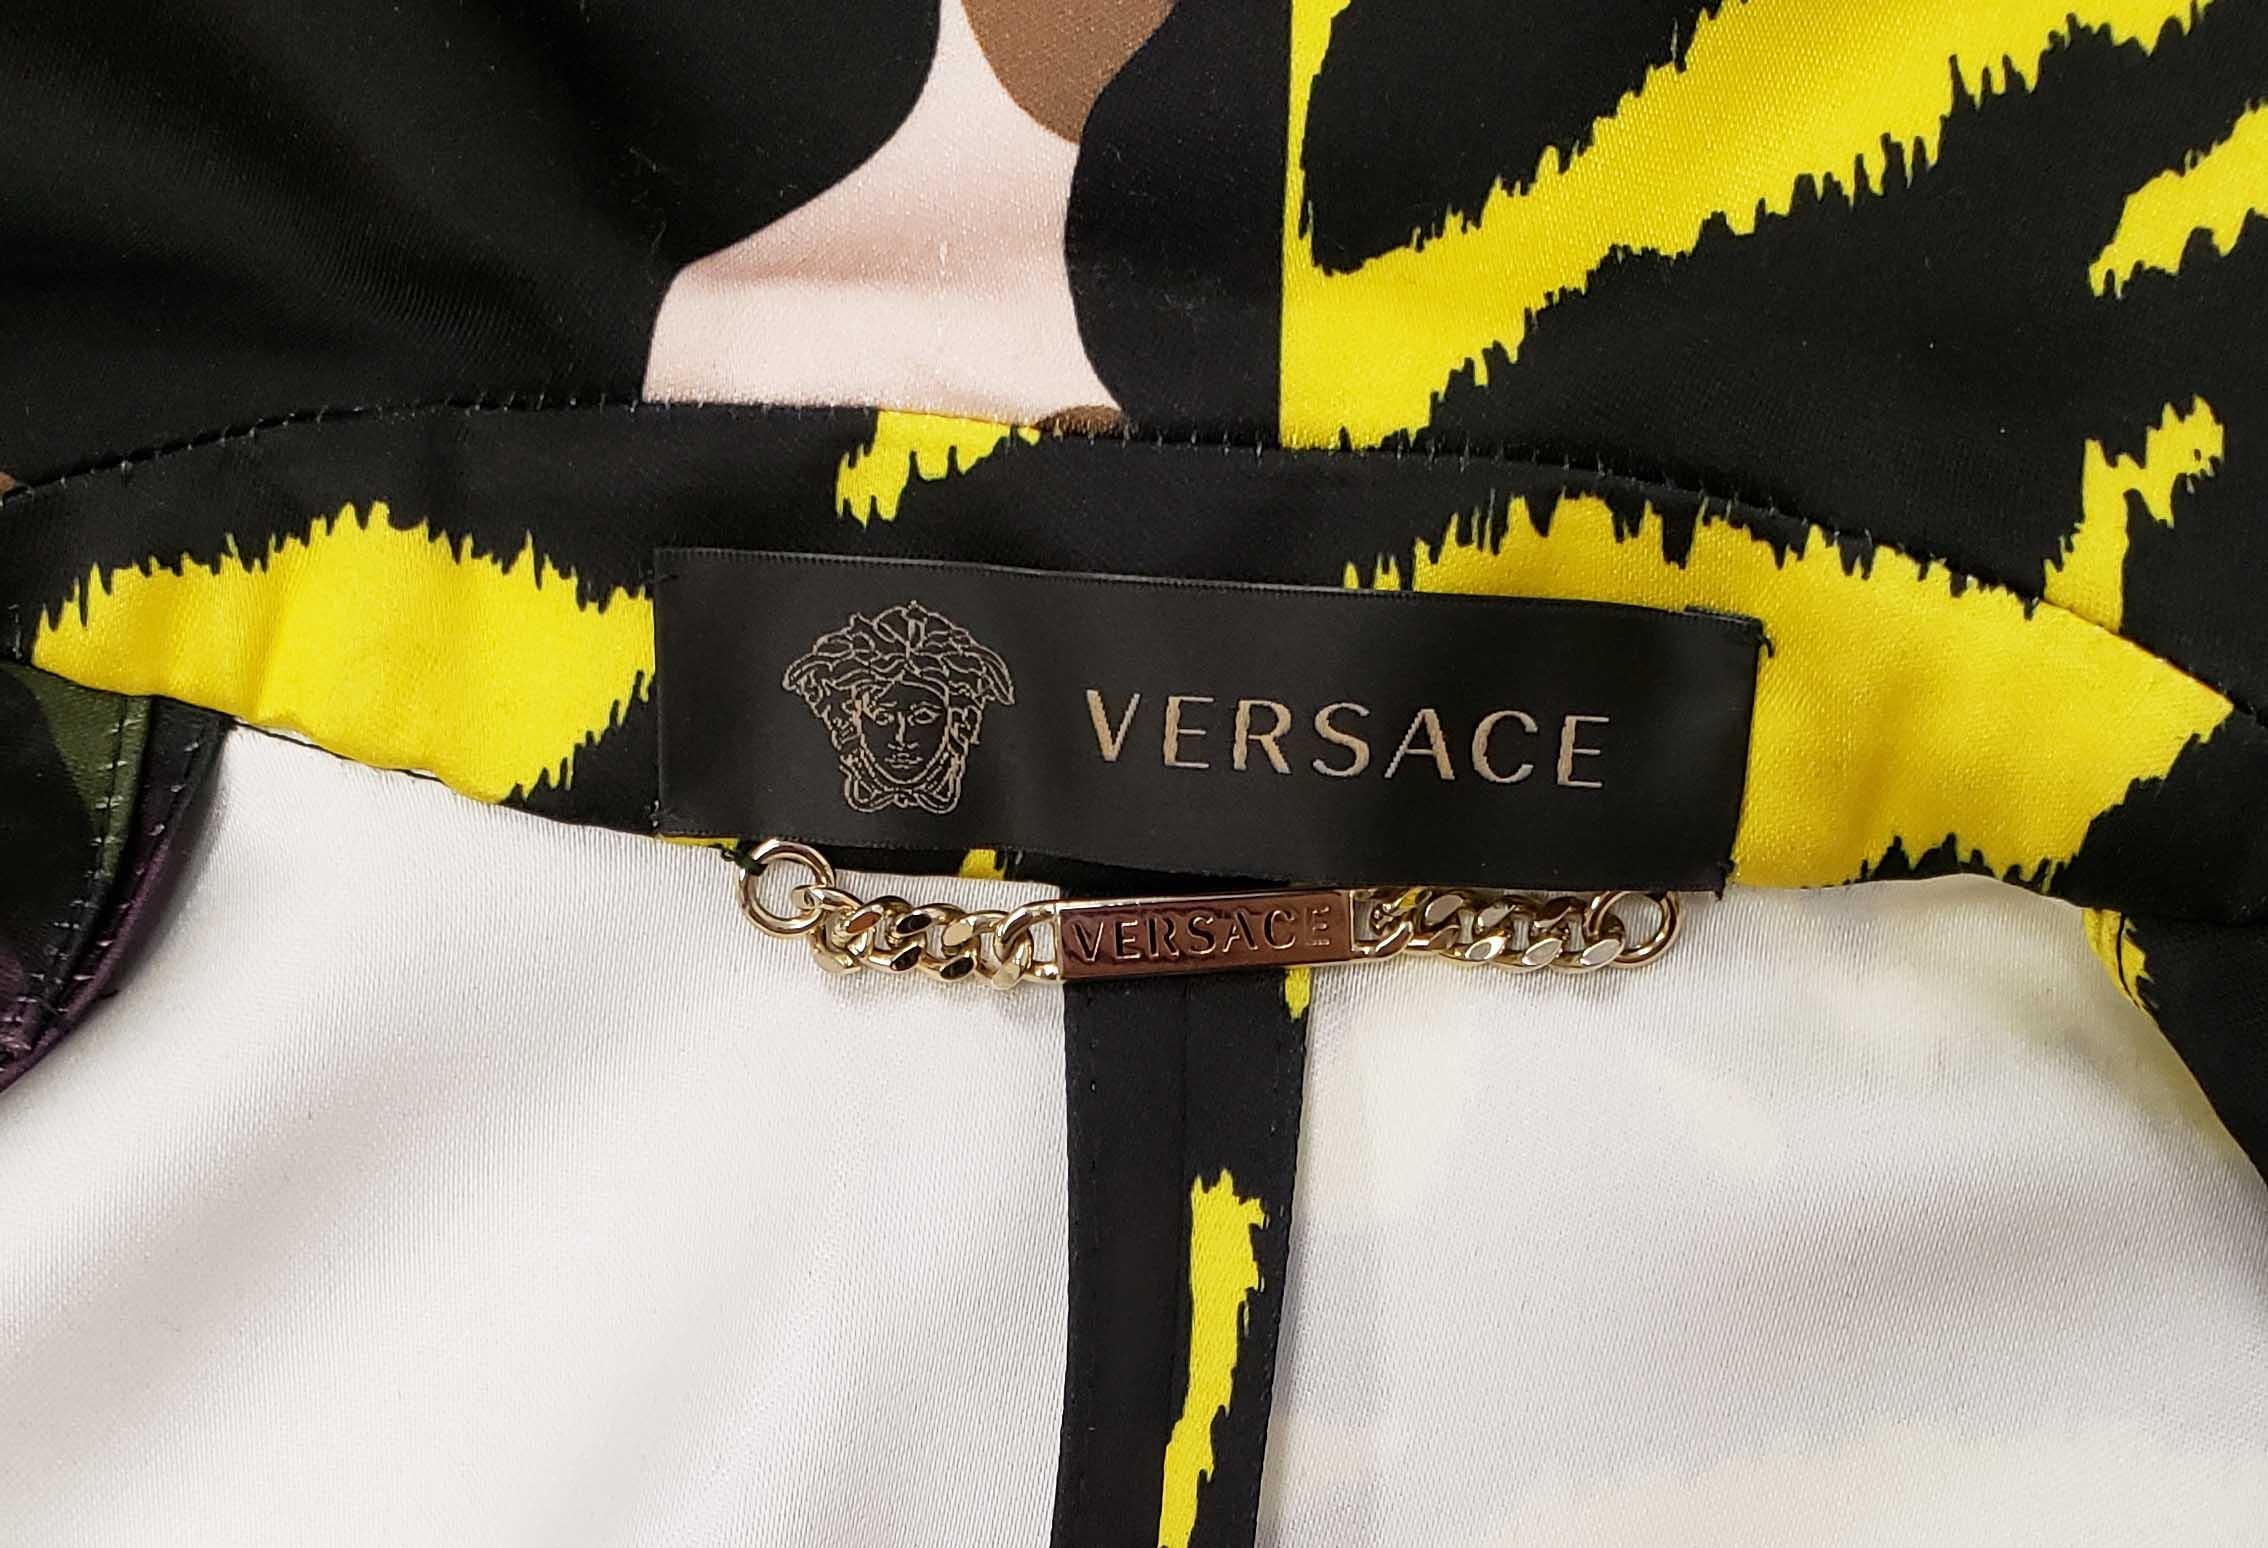 S/S 2016 L # 31 NEW VERSACE MULTI COLOR MILITARY Coat 38 - 2 For Sale 9